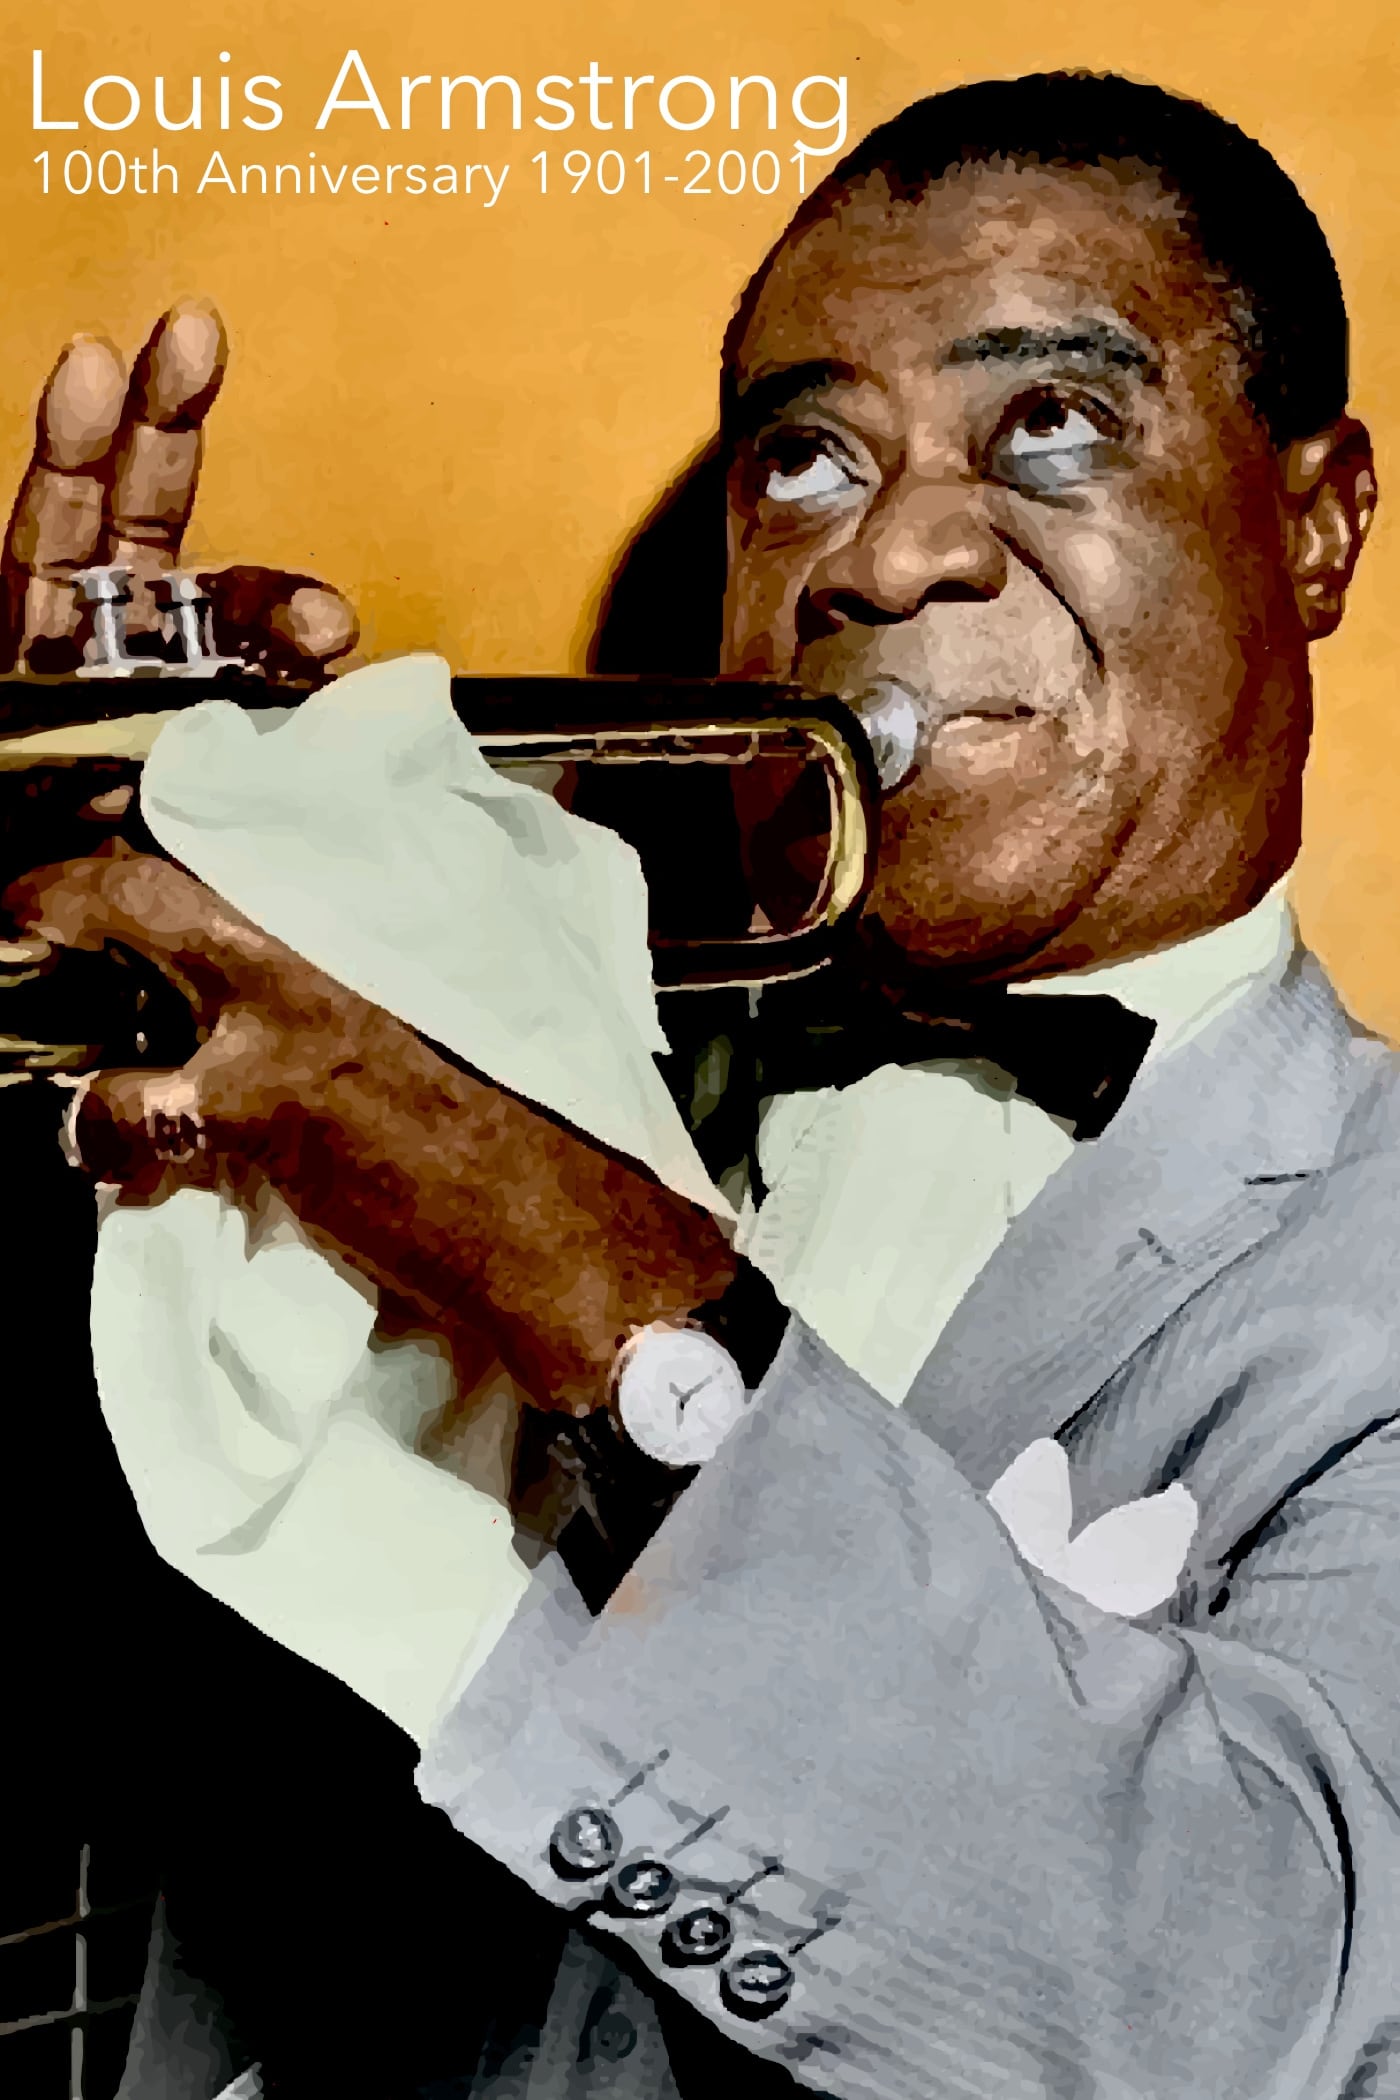 Louis Armstrong: 100th Anniversary 1901-2001